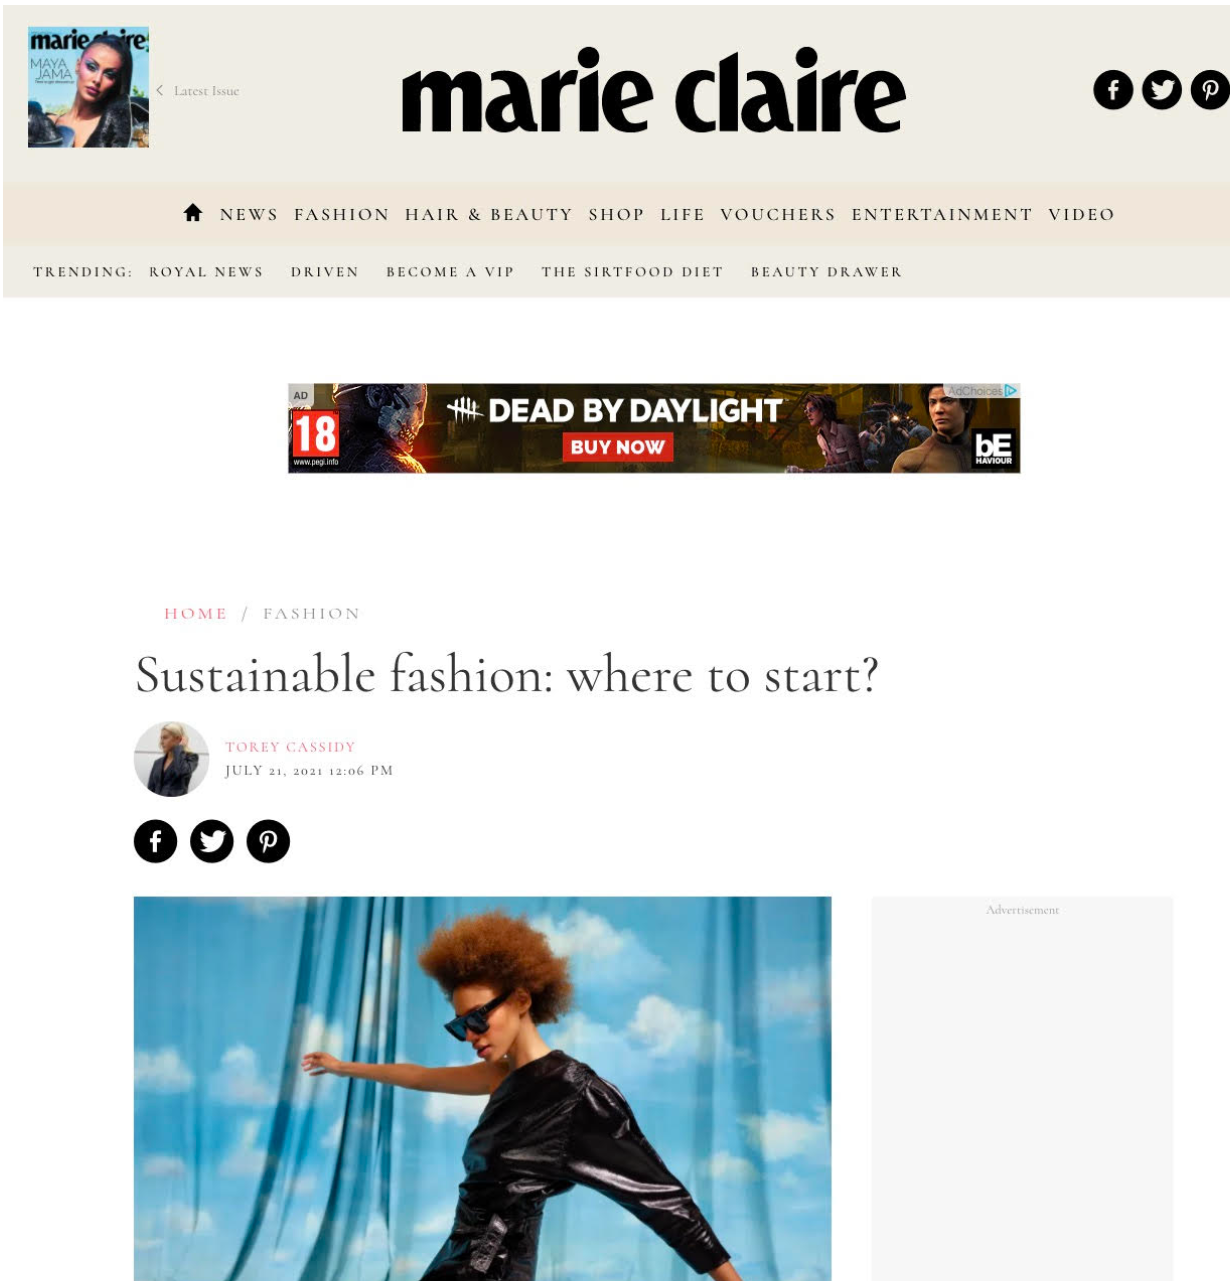 SKIIM featured in Marie Claire's "Sustainable fashion: where to start?"